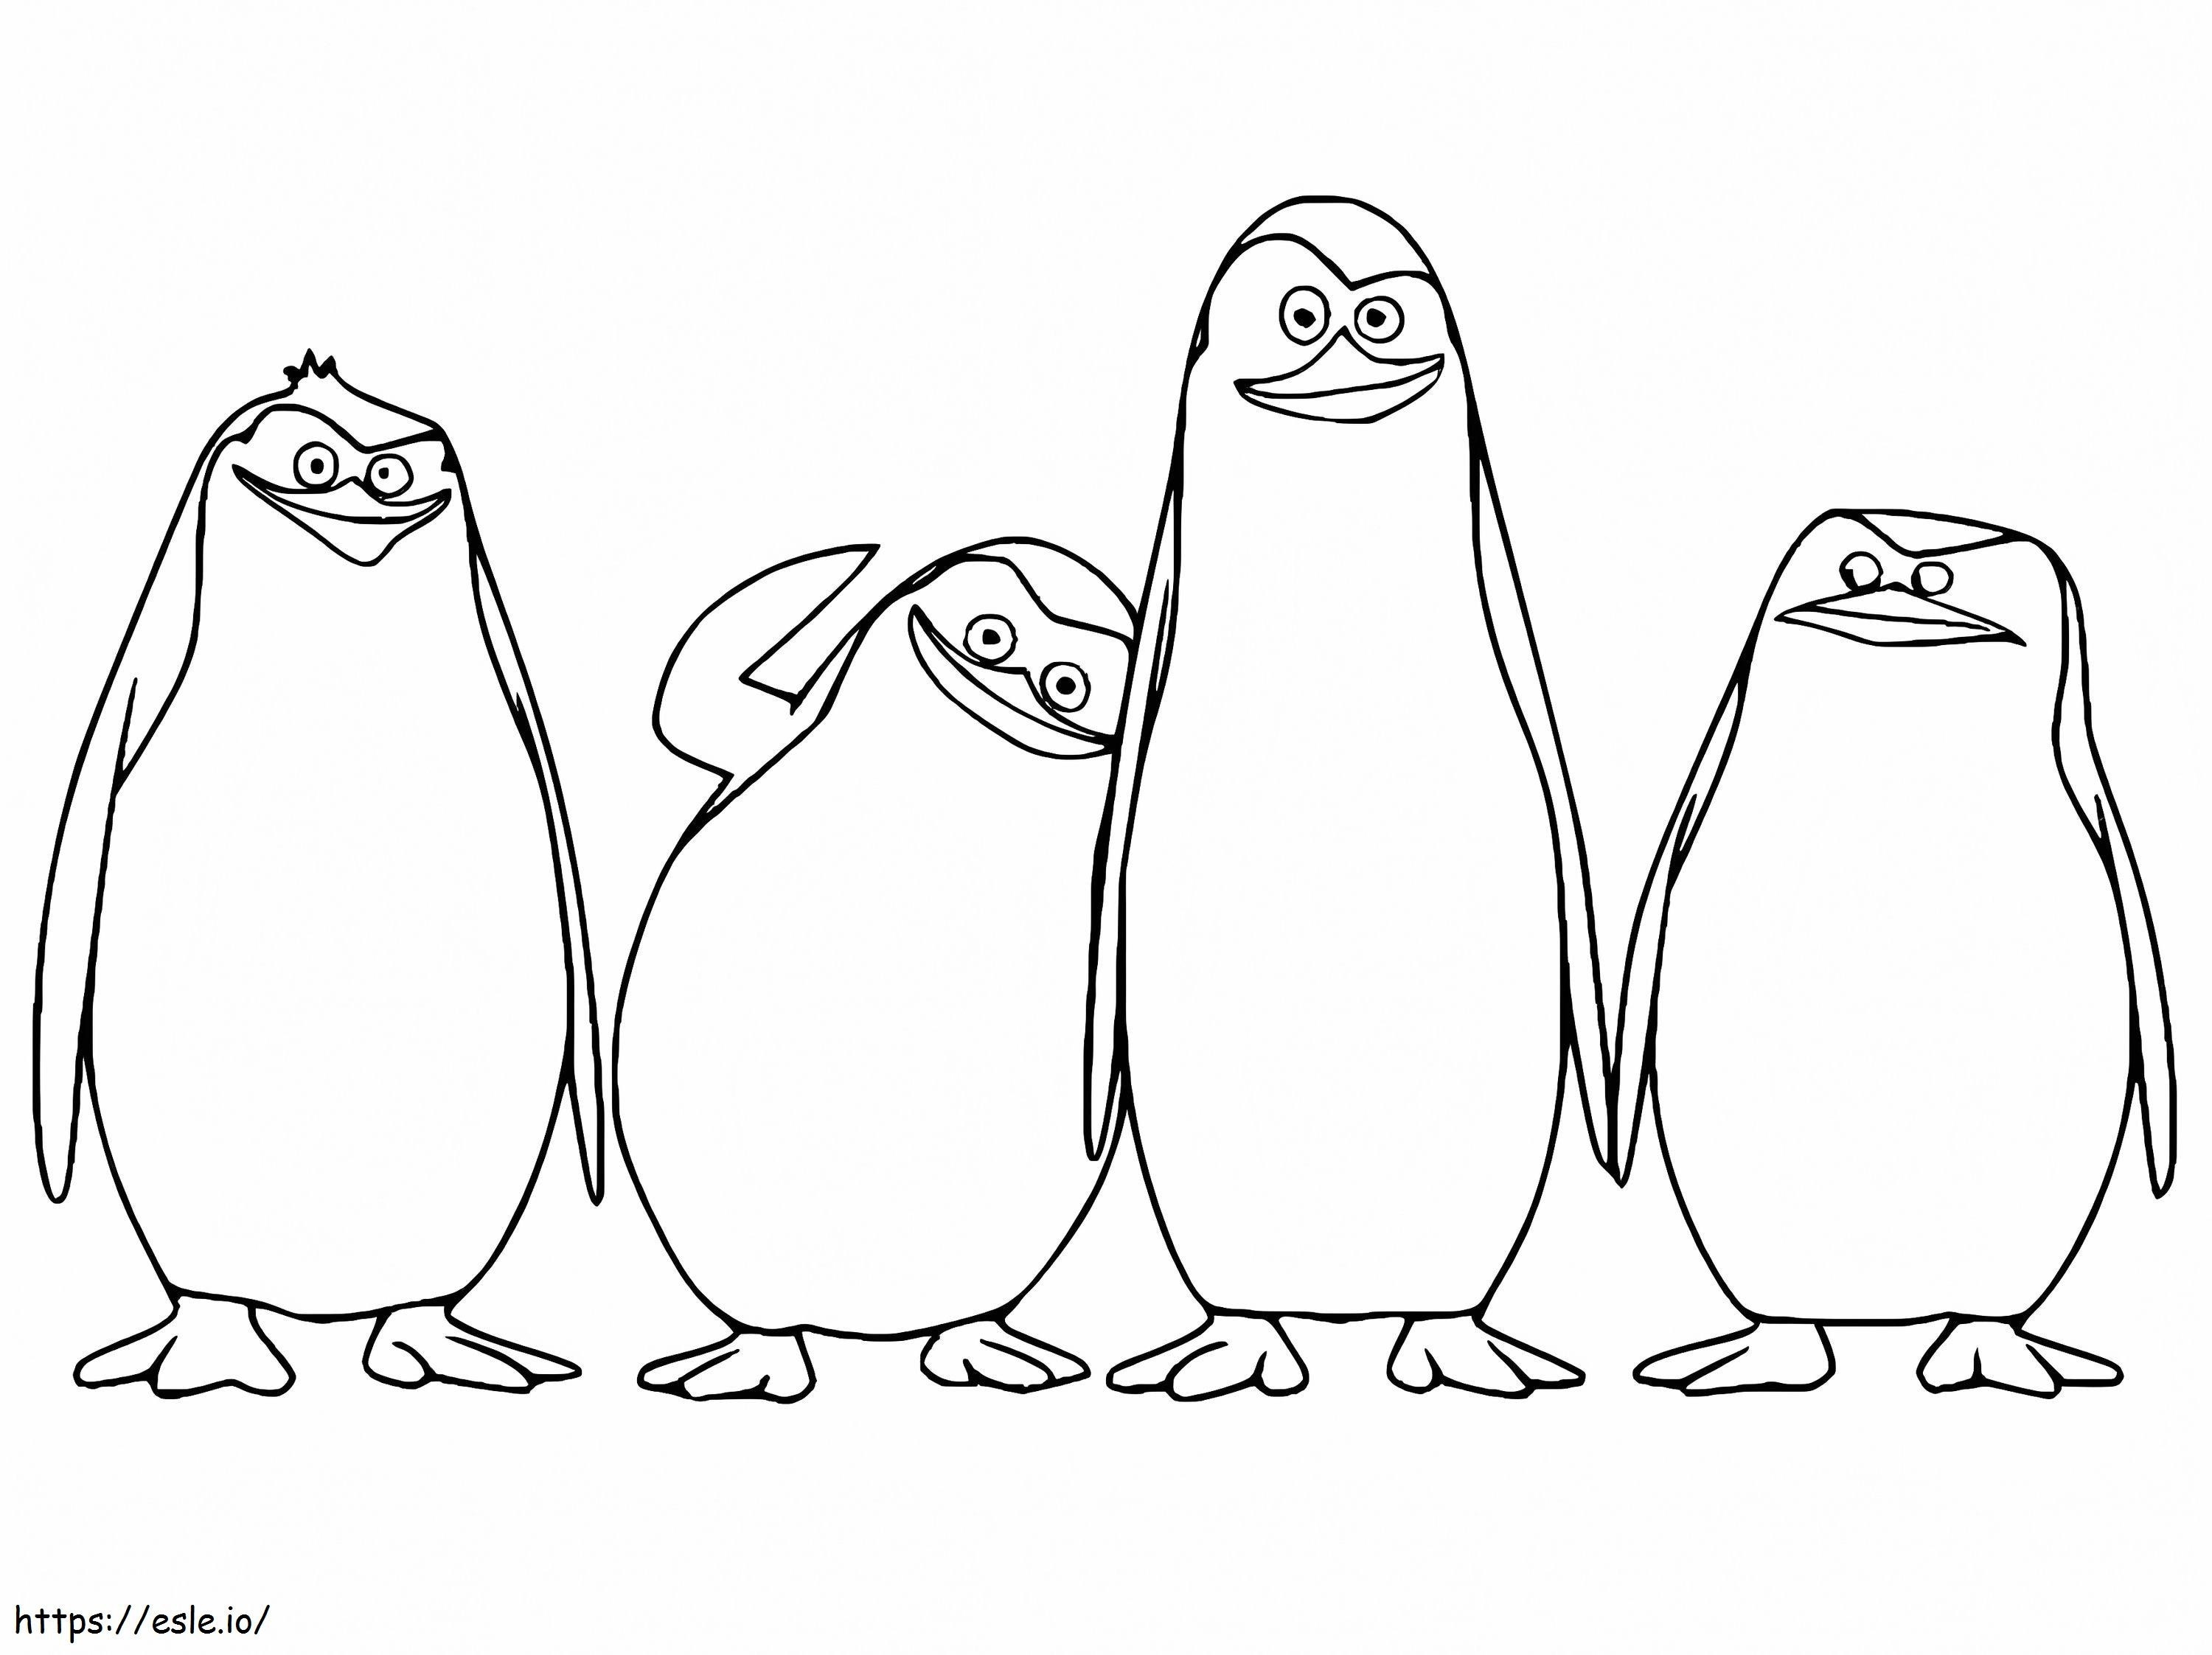 Cute Penguins Of Madagascar coloring page